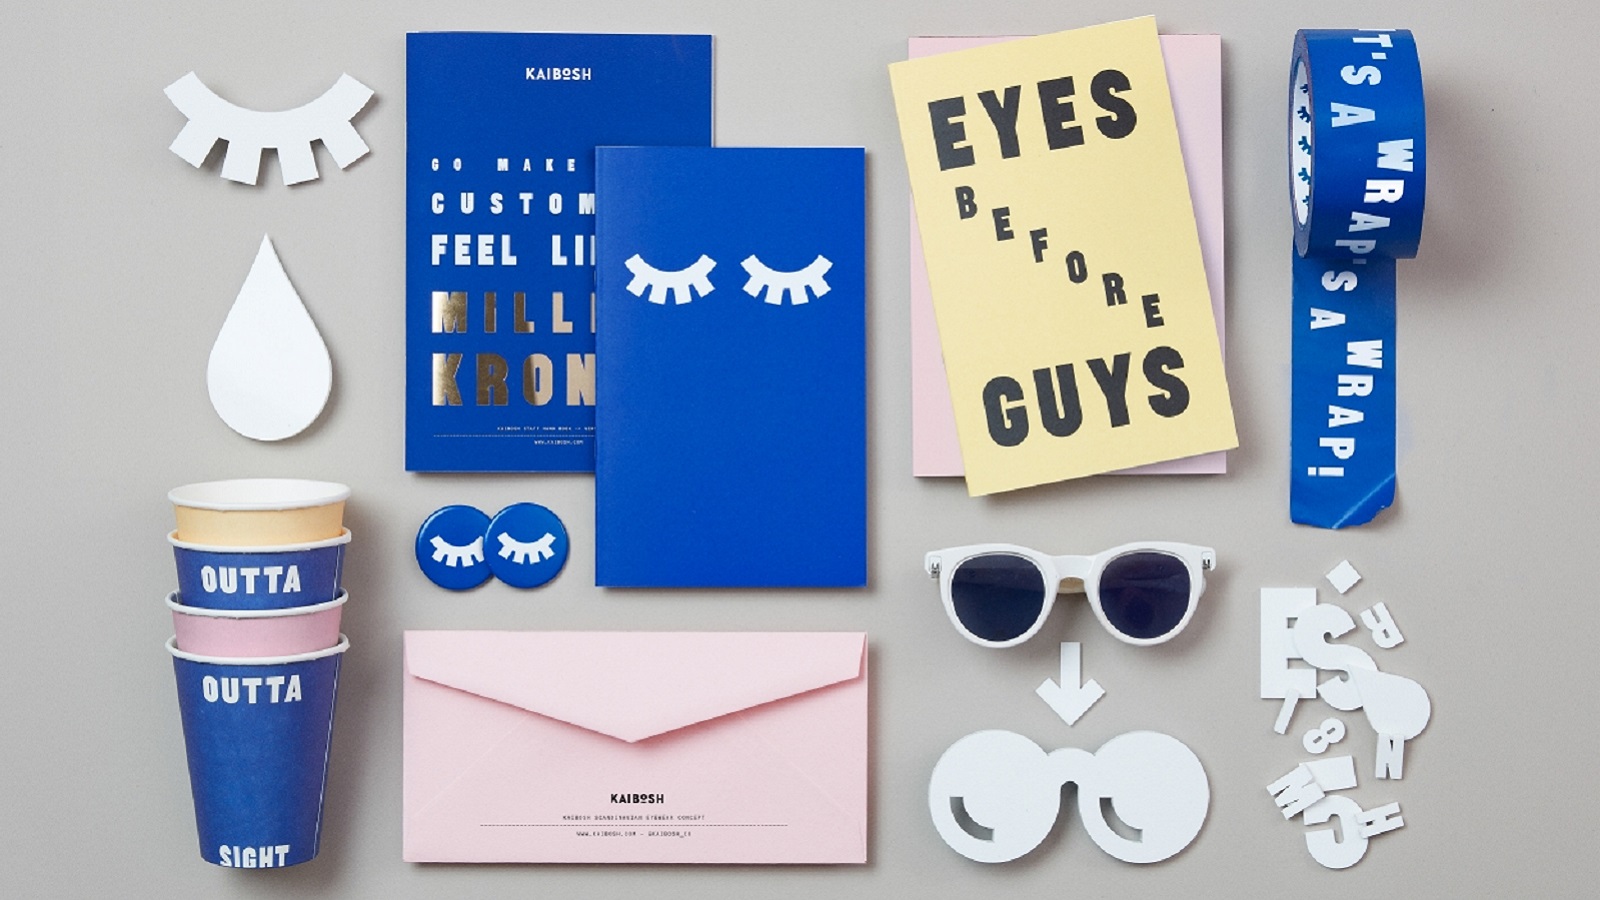 Norwegian Eyewear Store Has Its Personality Carved into a Shiny New Look